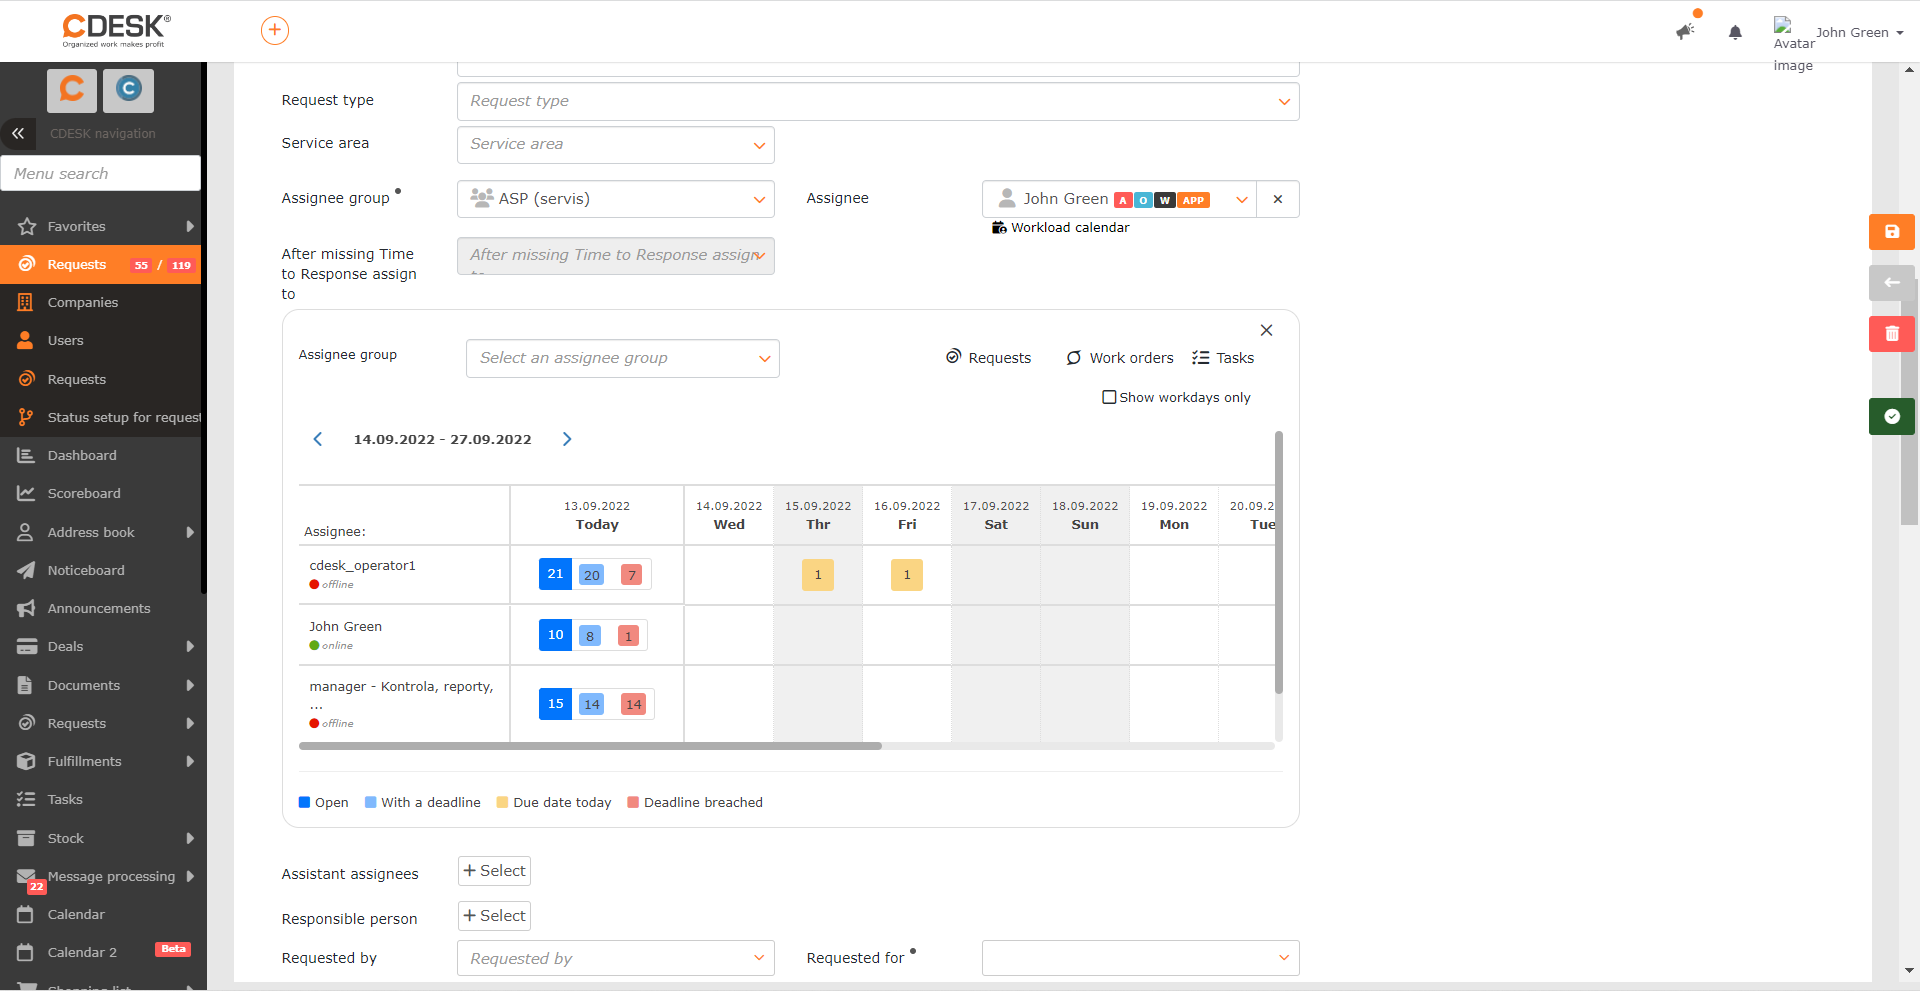 Workload Calendar, economic view in deals, archive of deleted requests and many other smart features.